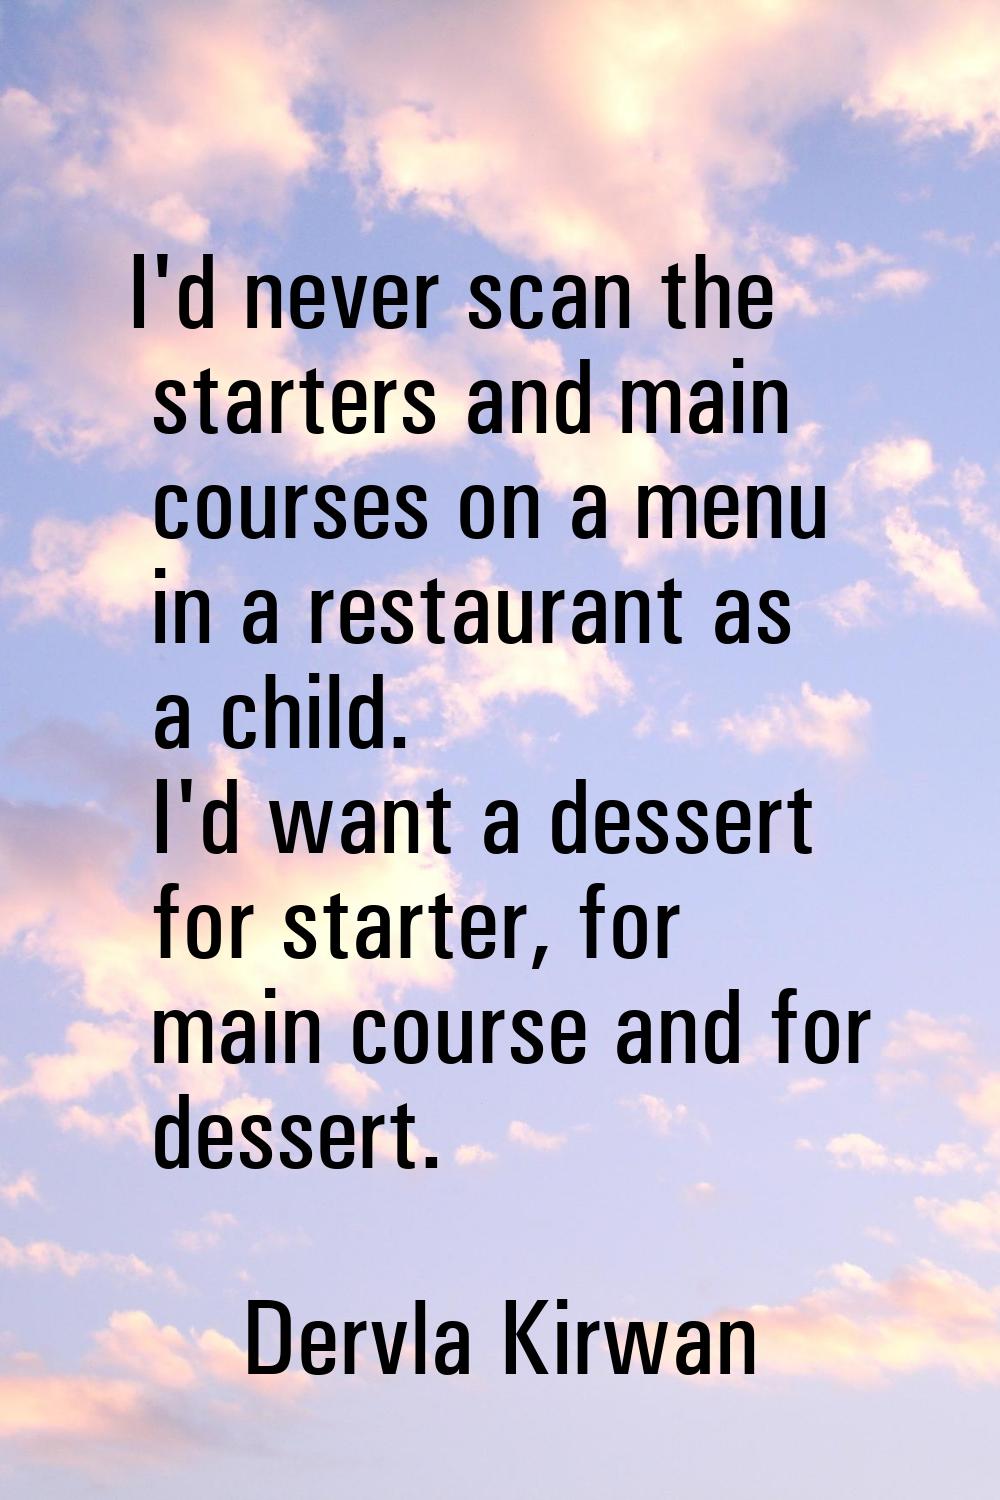 I'd never scan the starters and main courses on a menu in a restaurant as a child. I'd want a desse